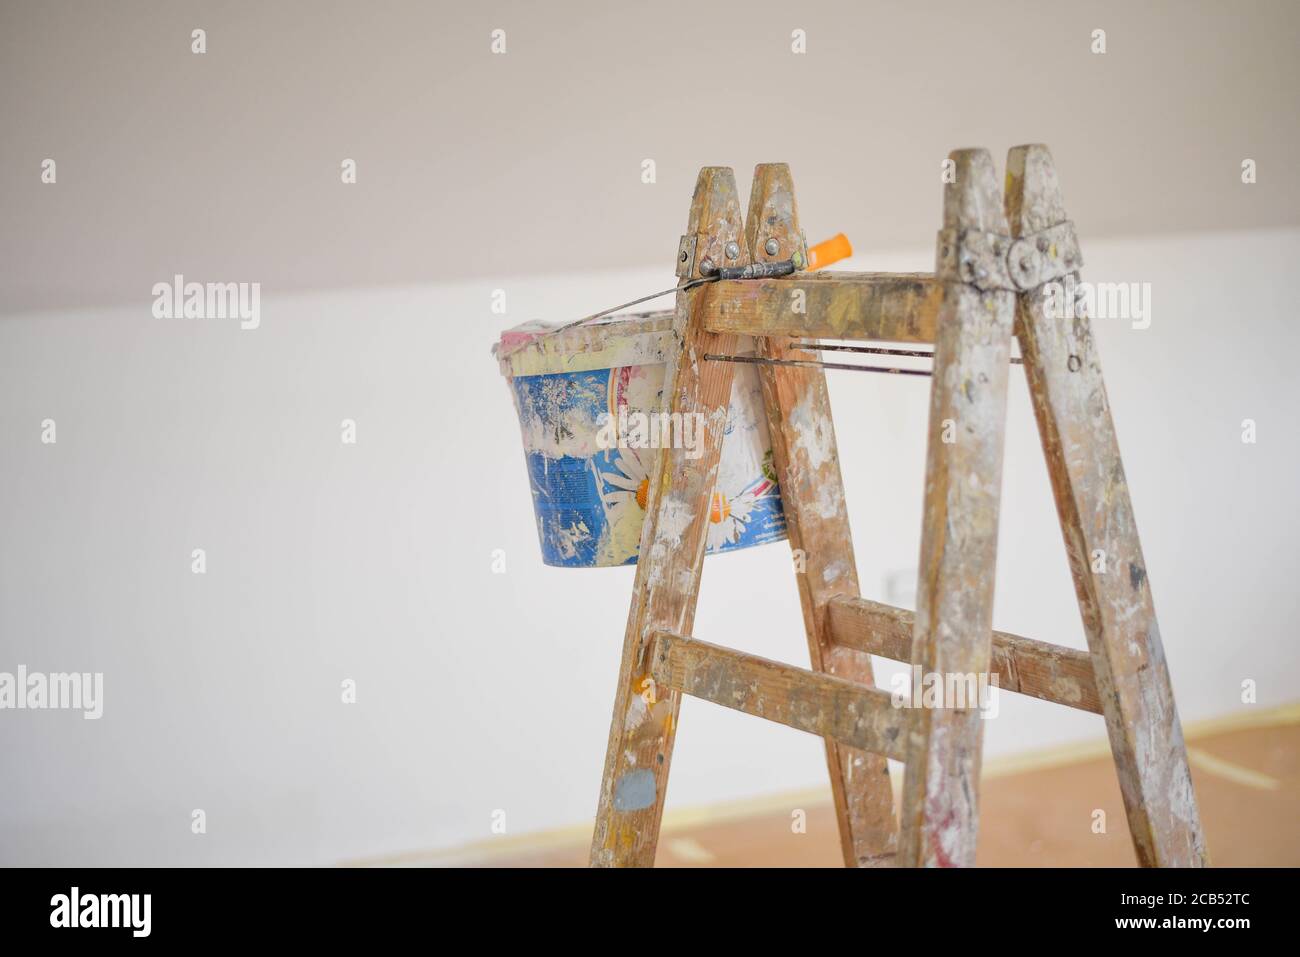 Closeup shot of a paint bucket hanging on a ladder Stock Photo